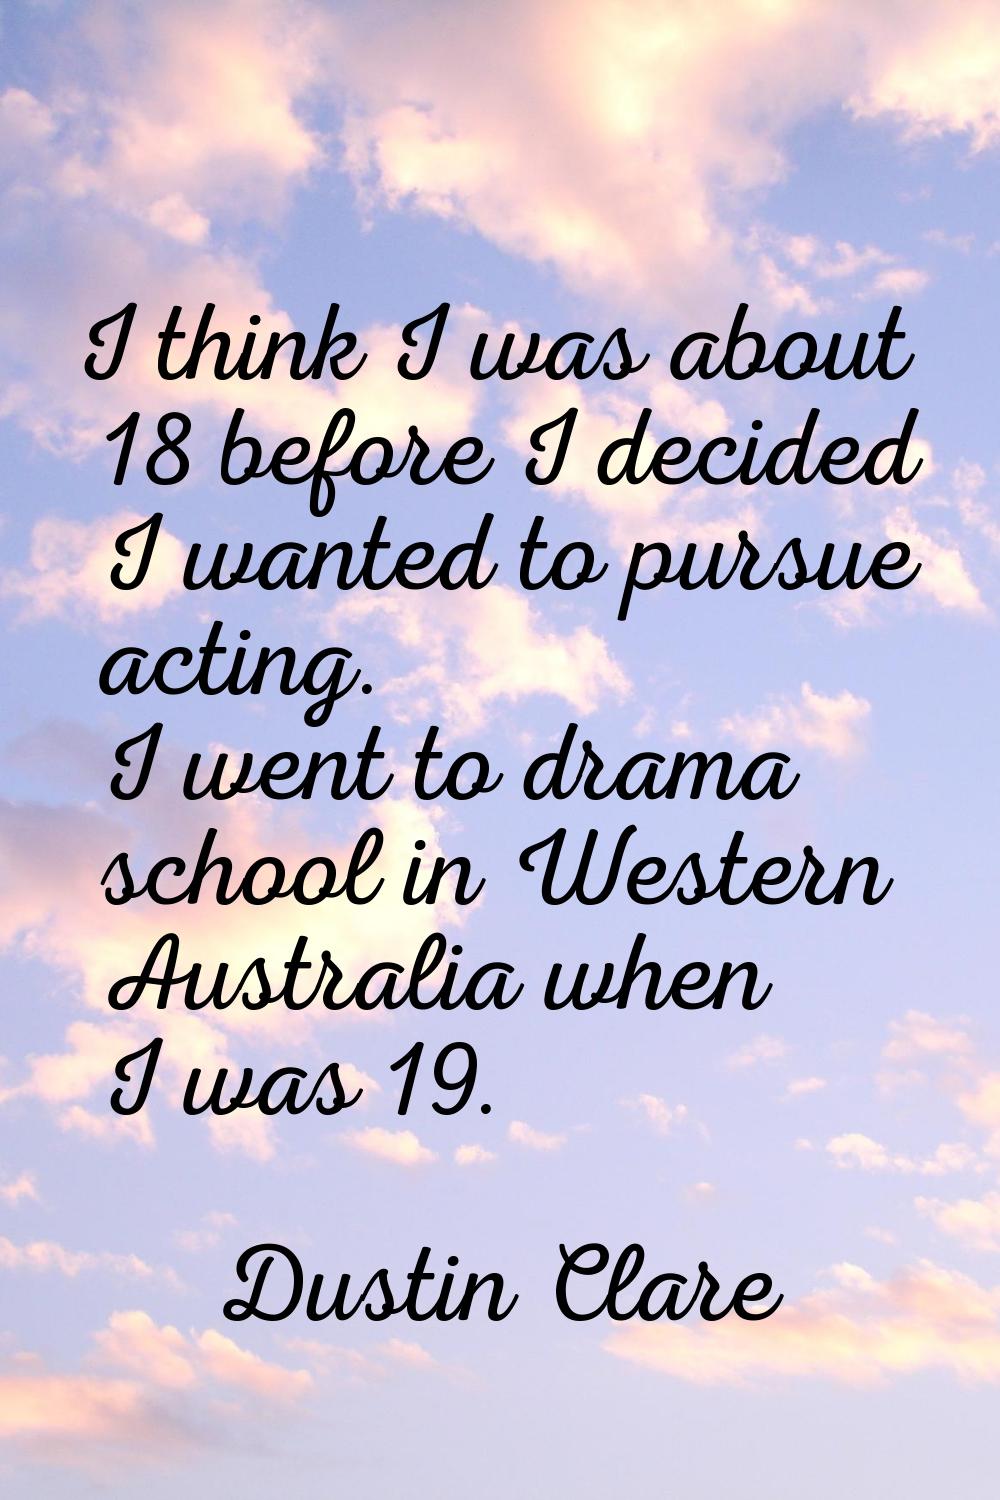 I think I was about 18 before I decided I wanted to pursue acting. I went to drama school in Wester